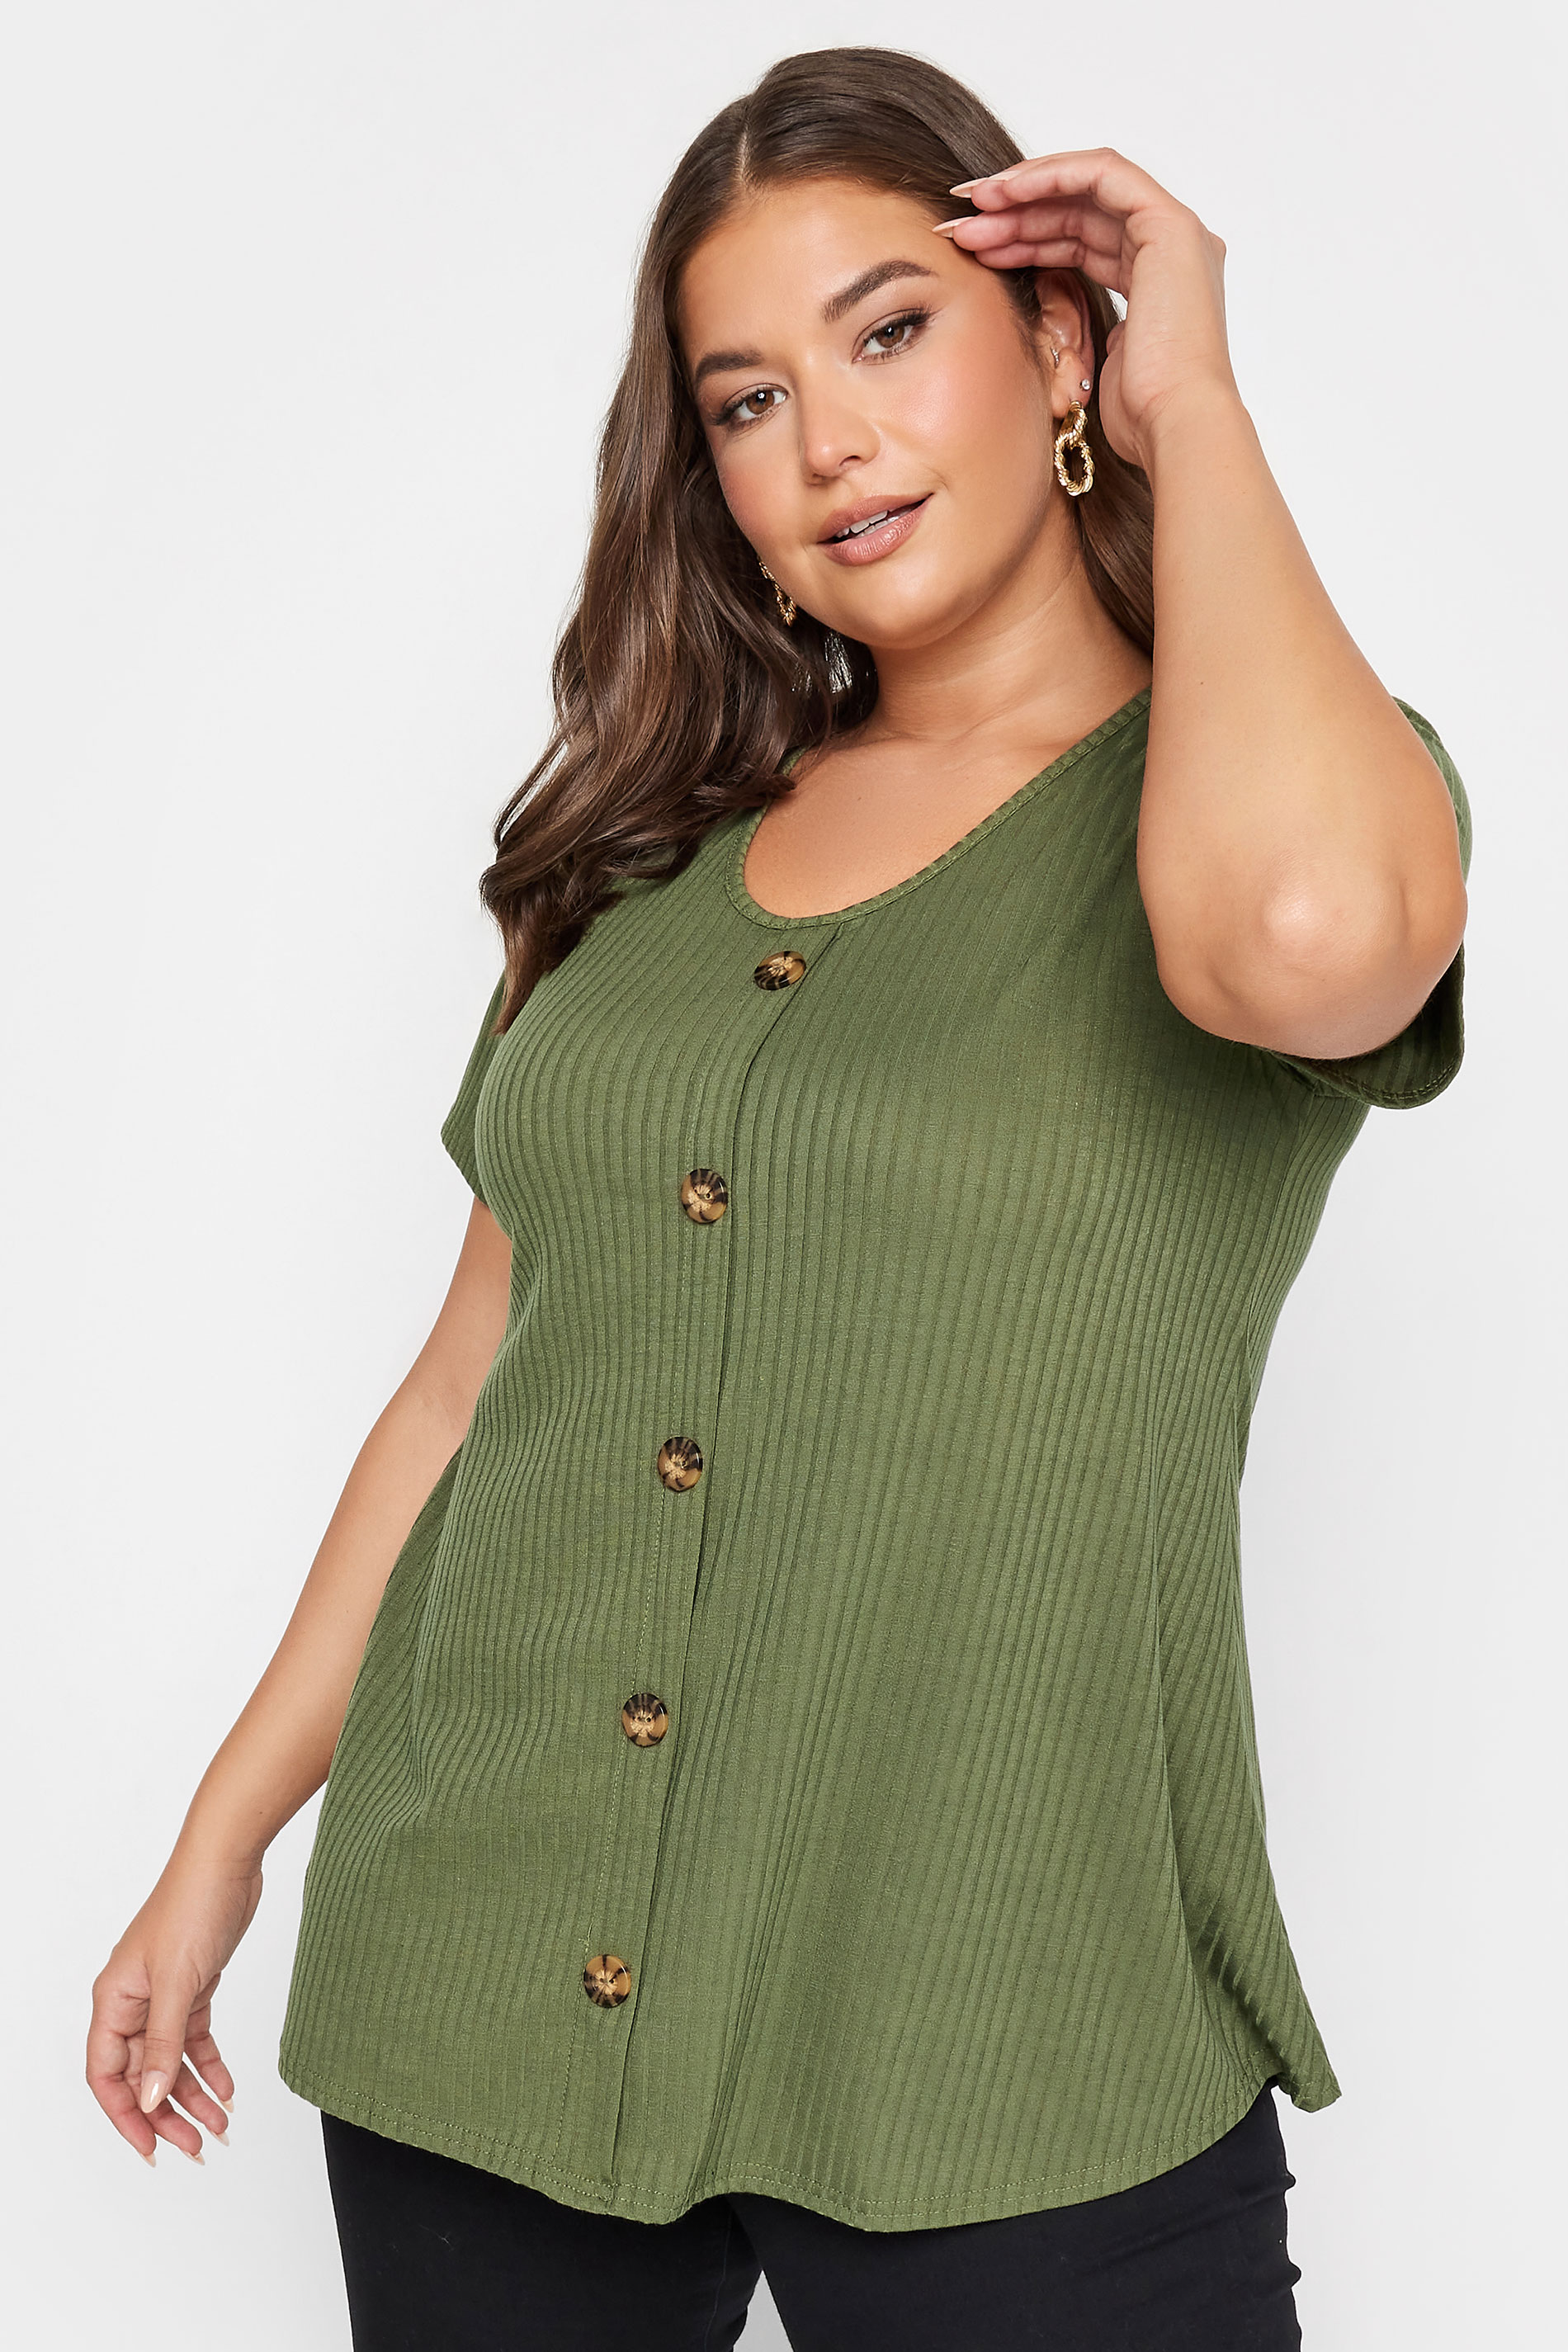 LIMITED COLLECTION Curve Plus Size 2 PACK Khaki Green & Black Ribbed Swing Tops | Yours Clothing  2